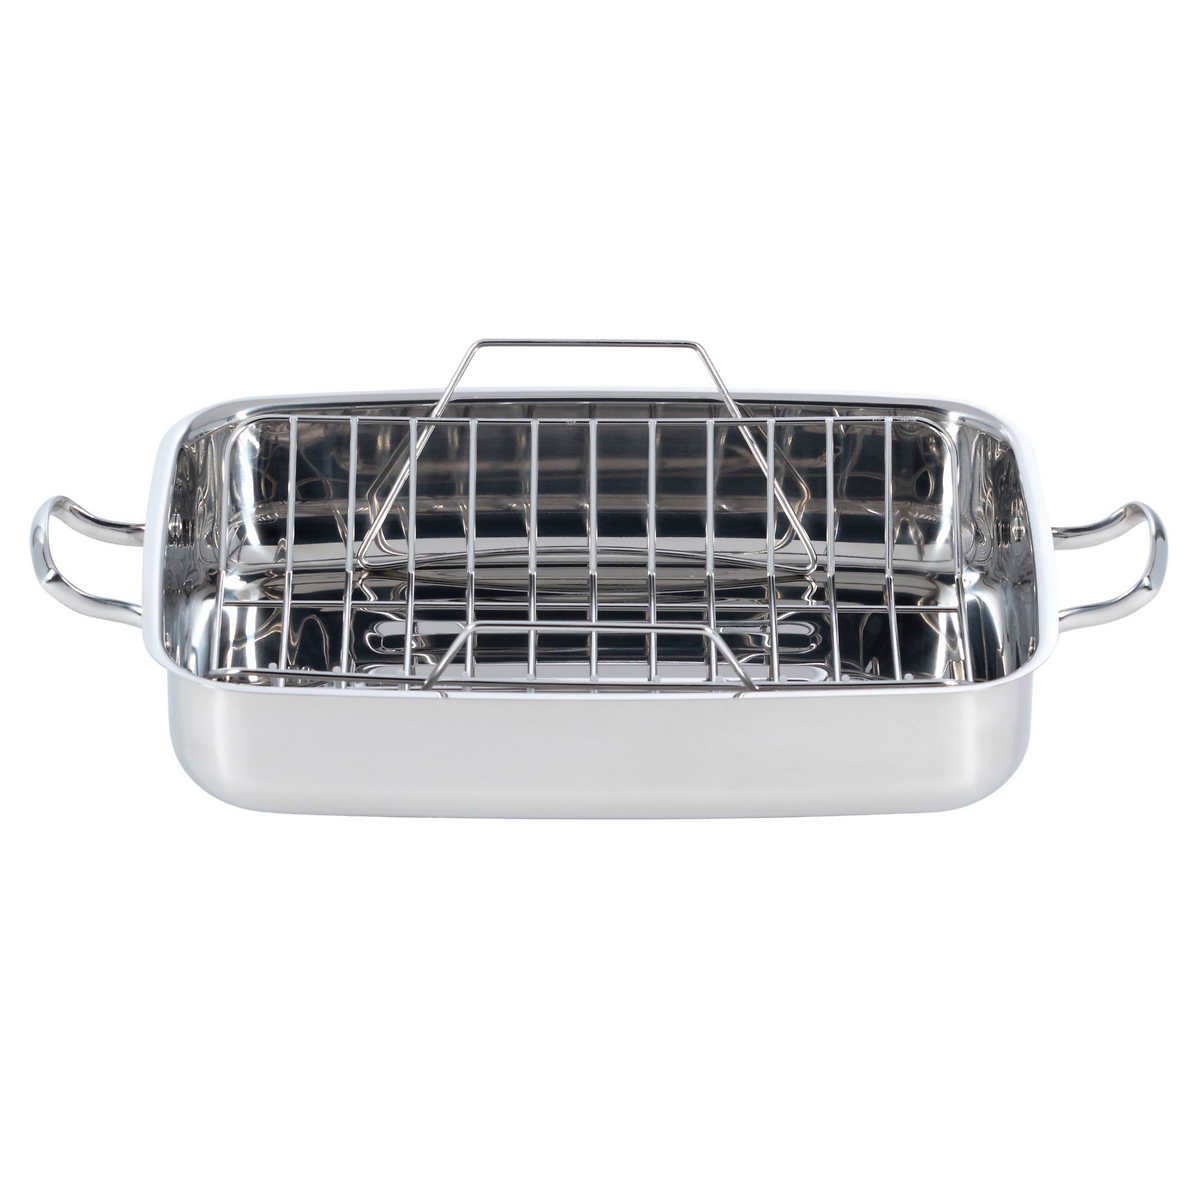 32Cm Stainless Steel Oval Roaster Set With Rack Cook Oven Including Rack New 